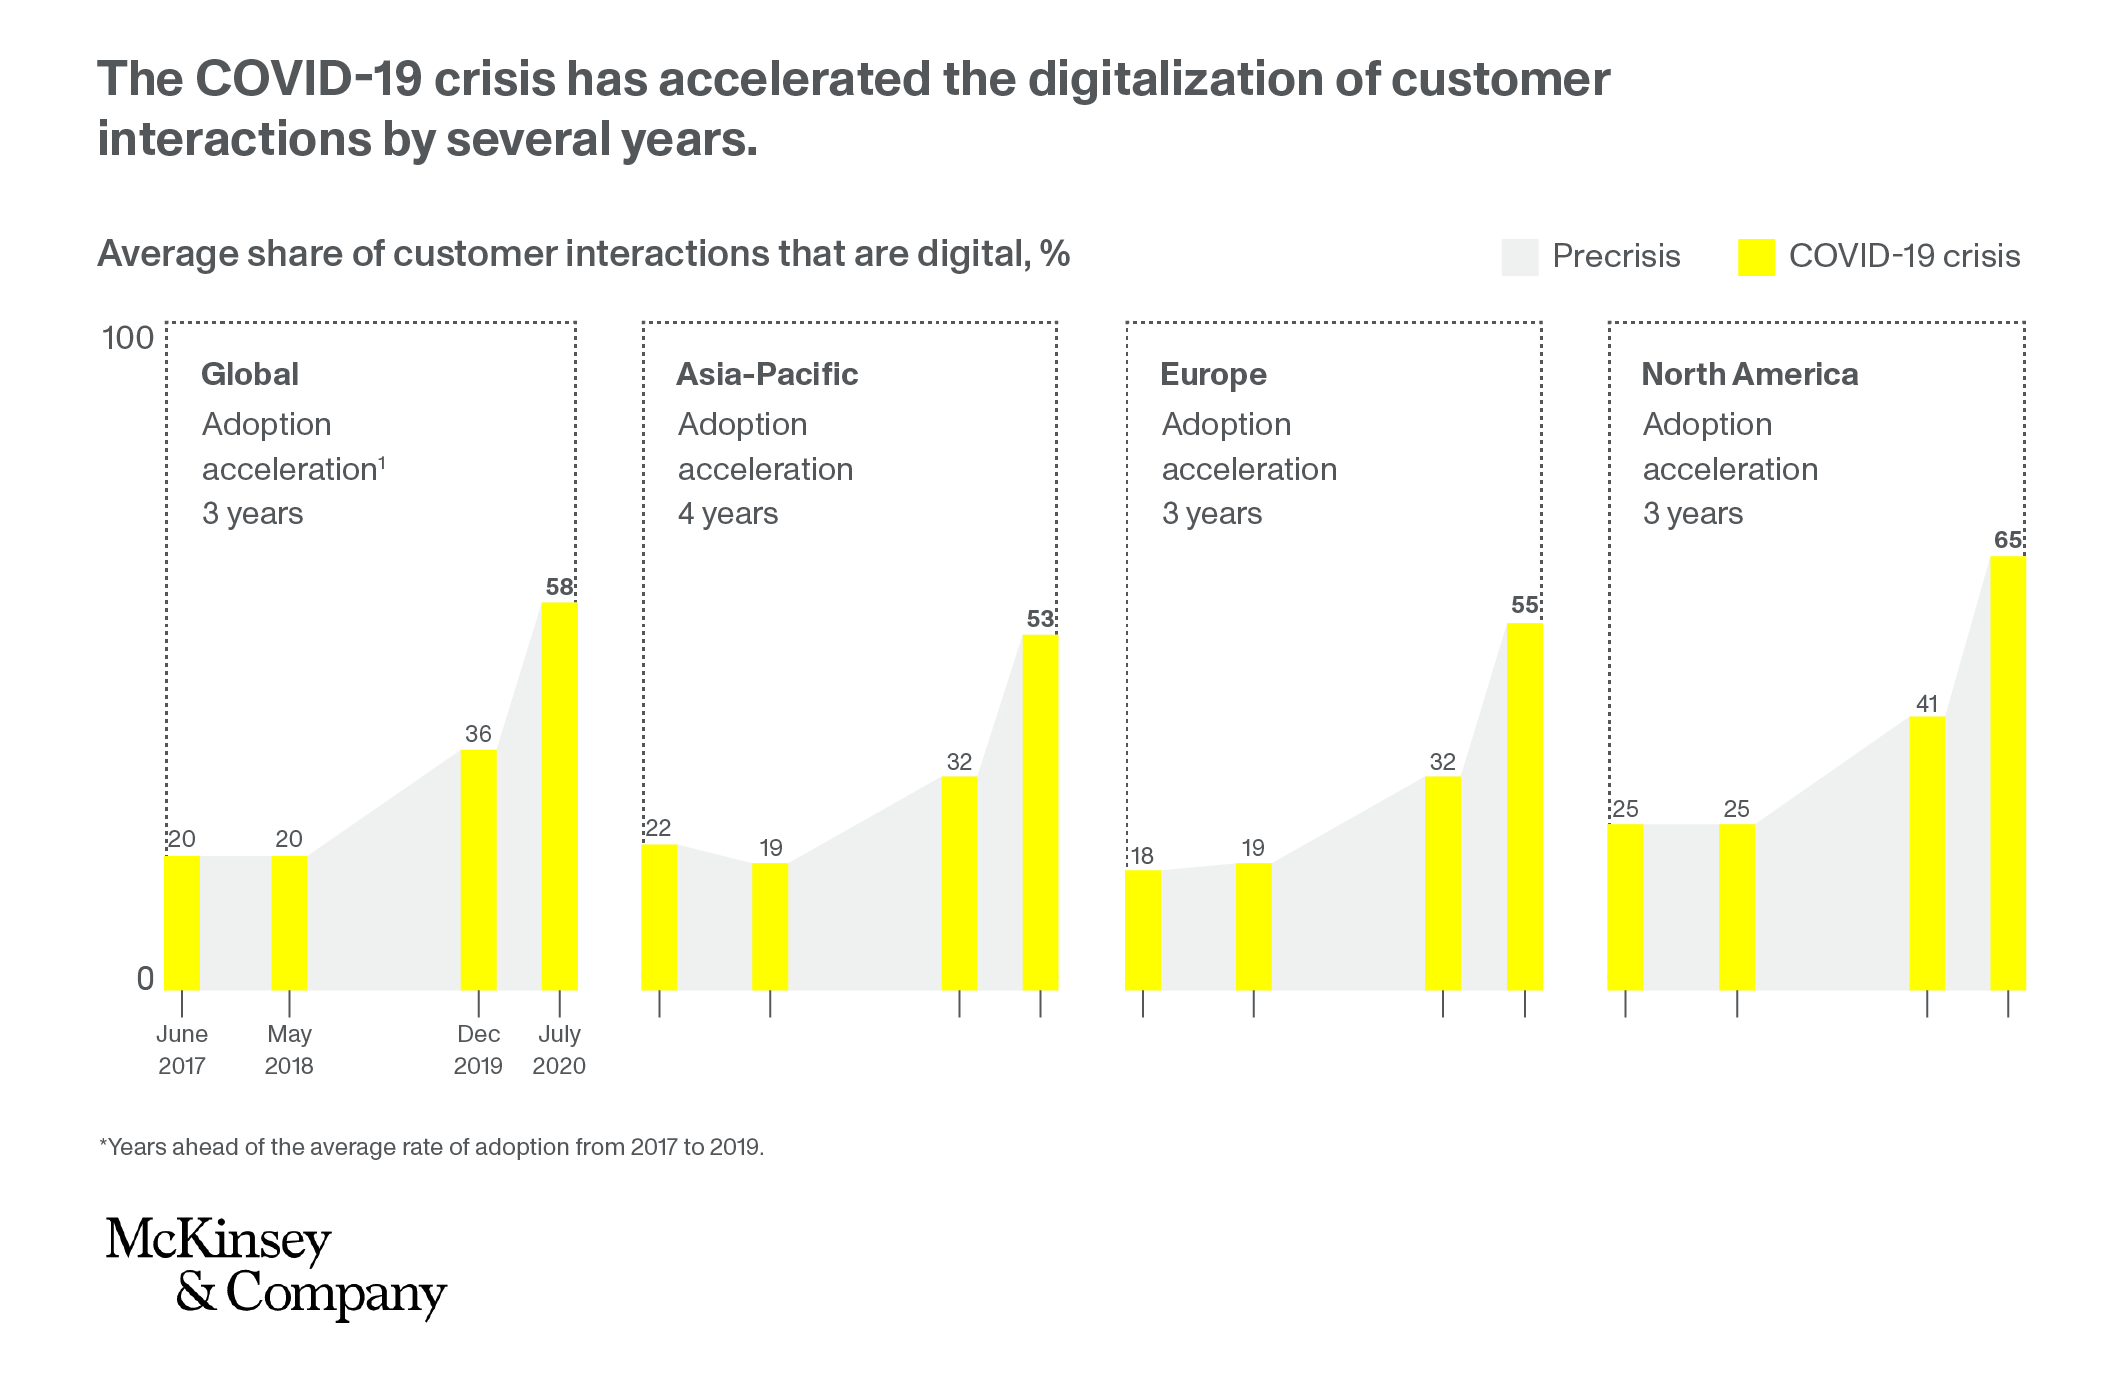 The COVID-19 crisis has accelerated the digitisation of customer interactions by several years.